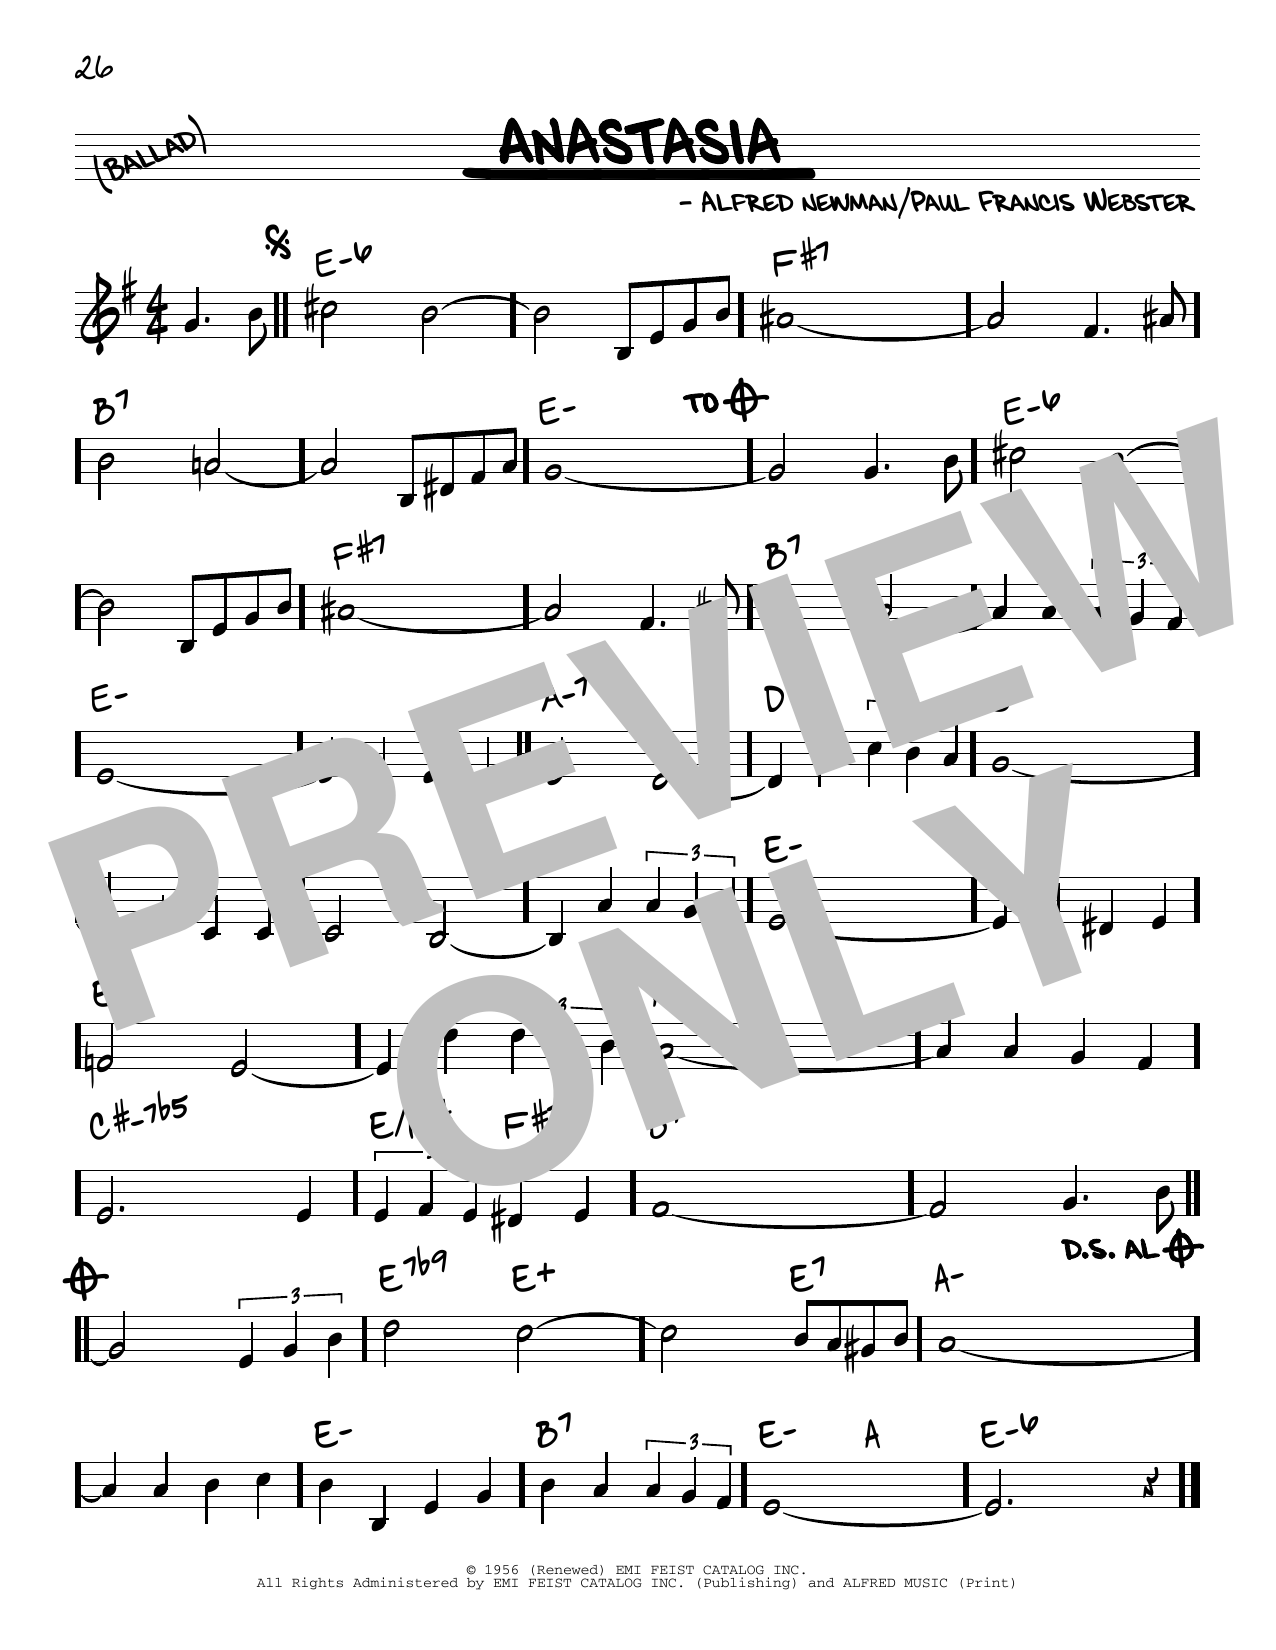 Download Paul Francis Webster and Alfred Newm Anastasia Sheet Music